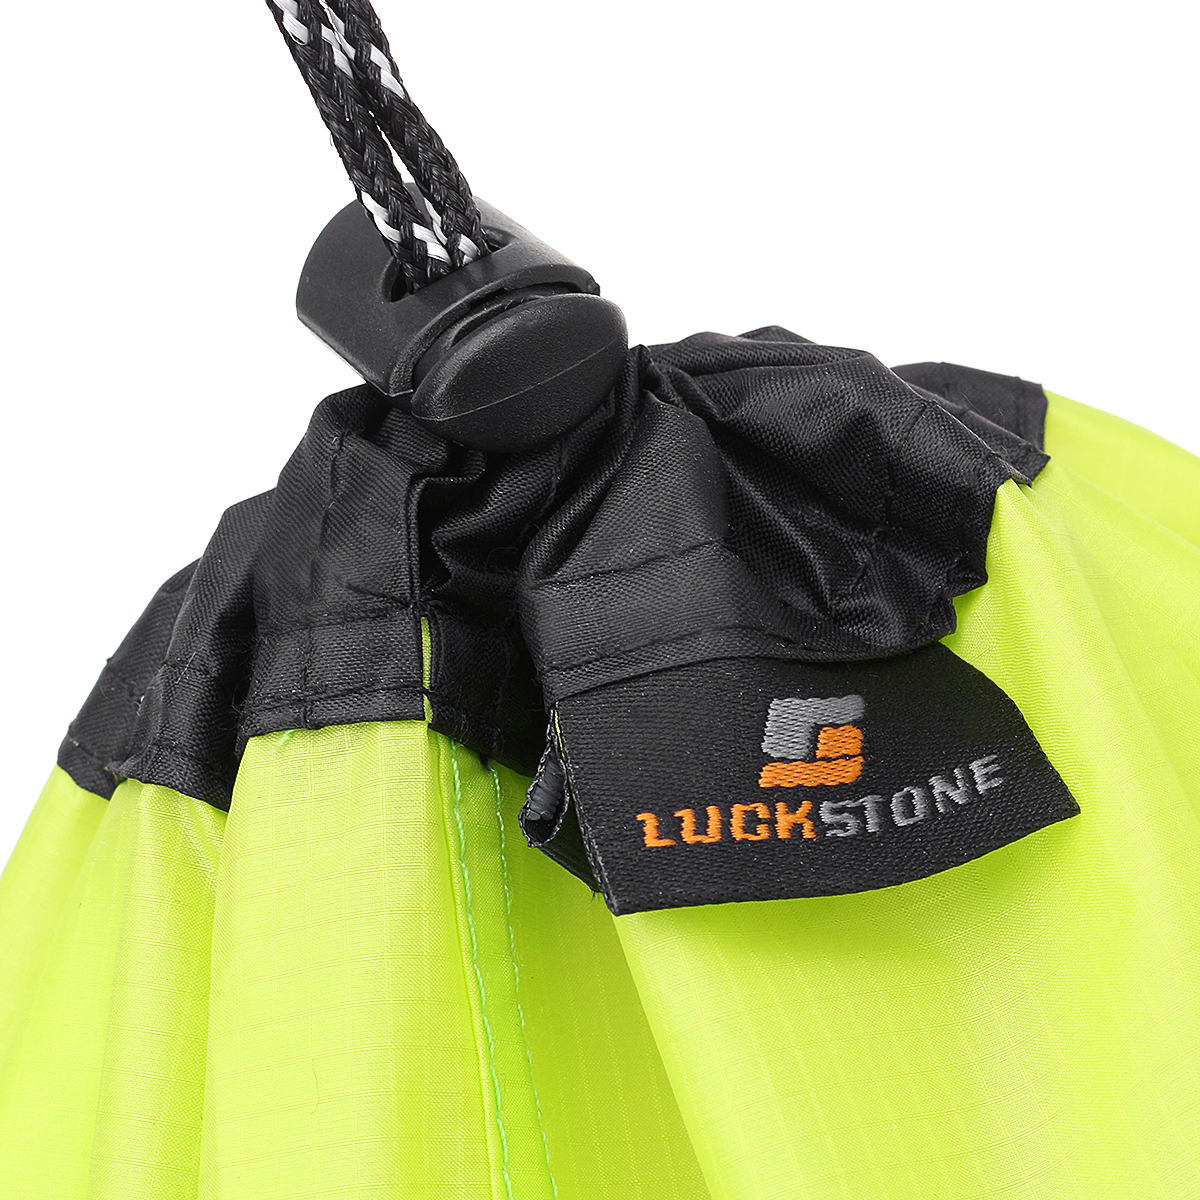 Portable-Drawstring-Storage-Bag-Outdoor-Waterproof-Traveling-Clothes-Shoes-Bag-SMLXL2XL-1555374-7